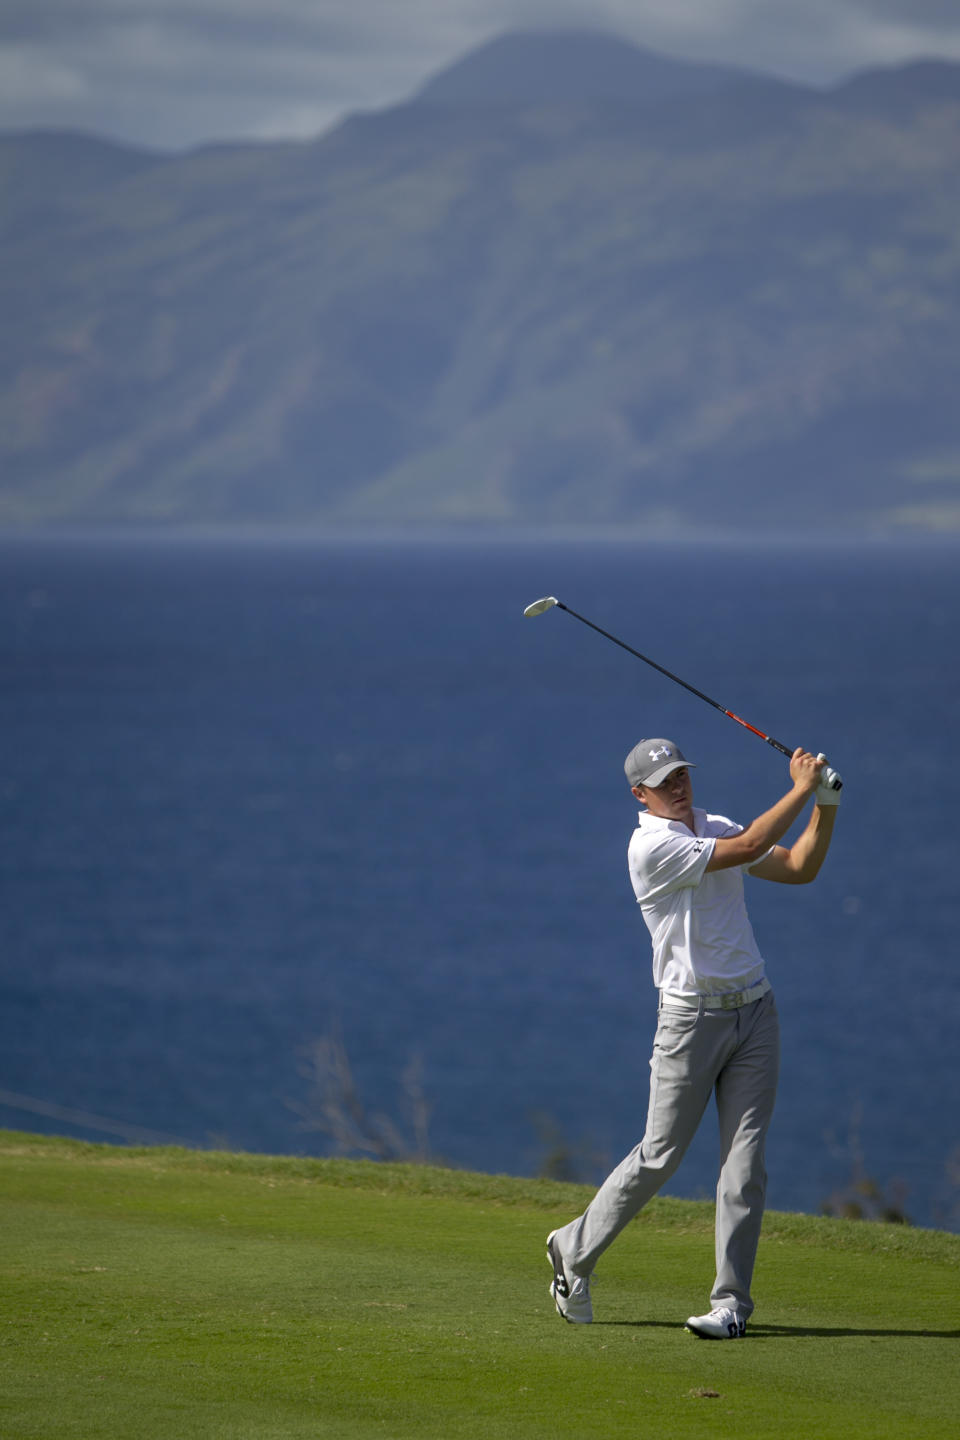 Jordan Spieth drives on the 13th green during the final round of the Tournament of Champions golf tournament, Monday, Jan. 6, 2014, in Kapalua, Hawaii. (AP Photo/Marco Garcia)